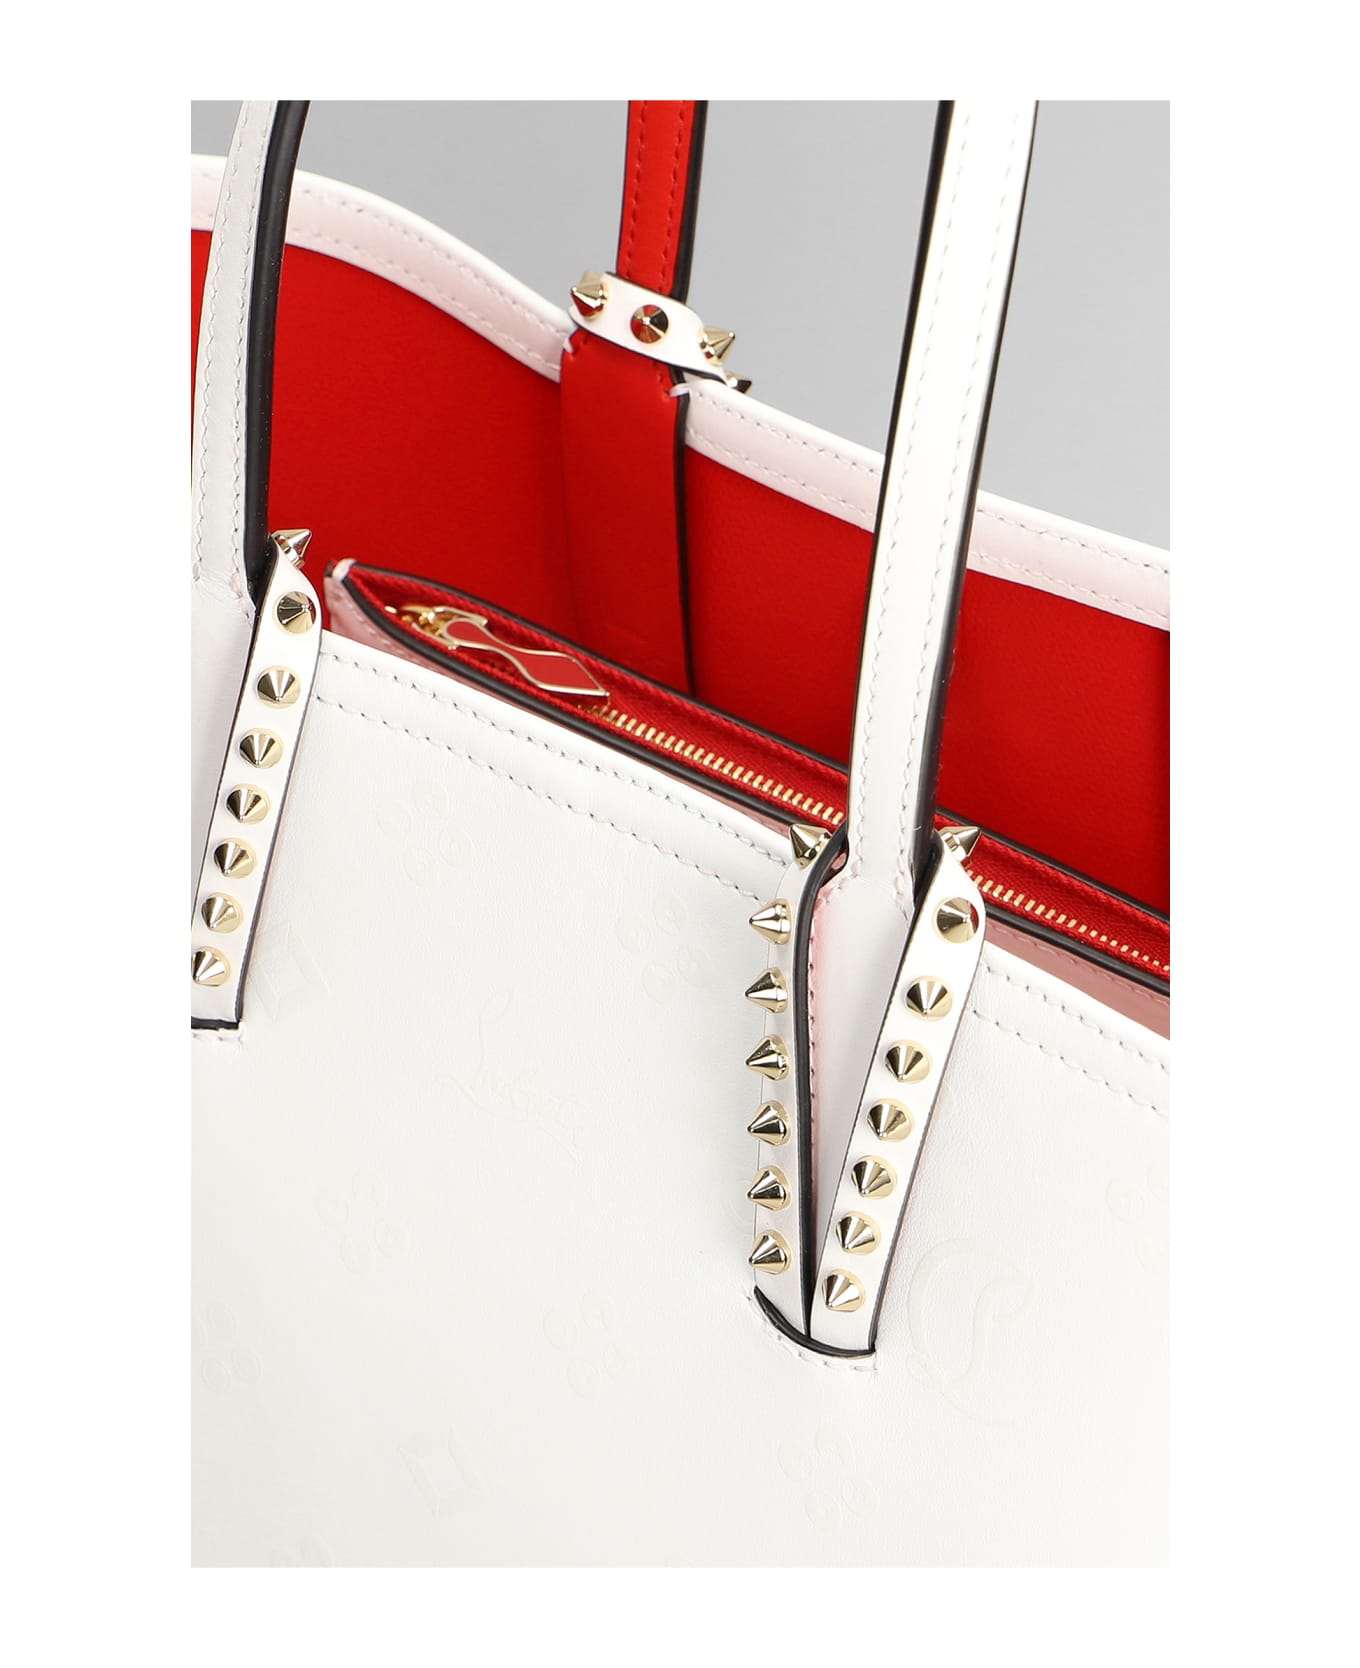 Christian Louboutin Tote In White Leather | italist, ALWAYS LIKE A SALE